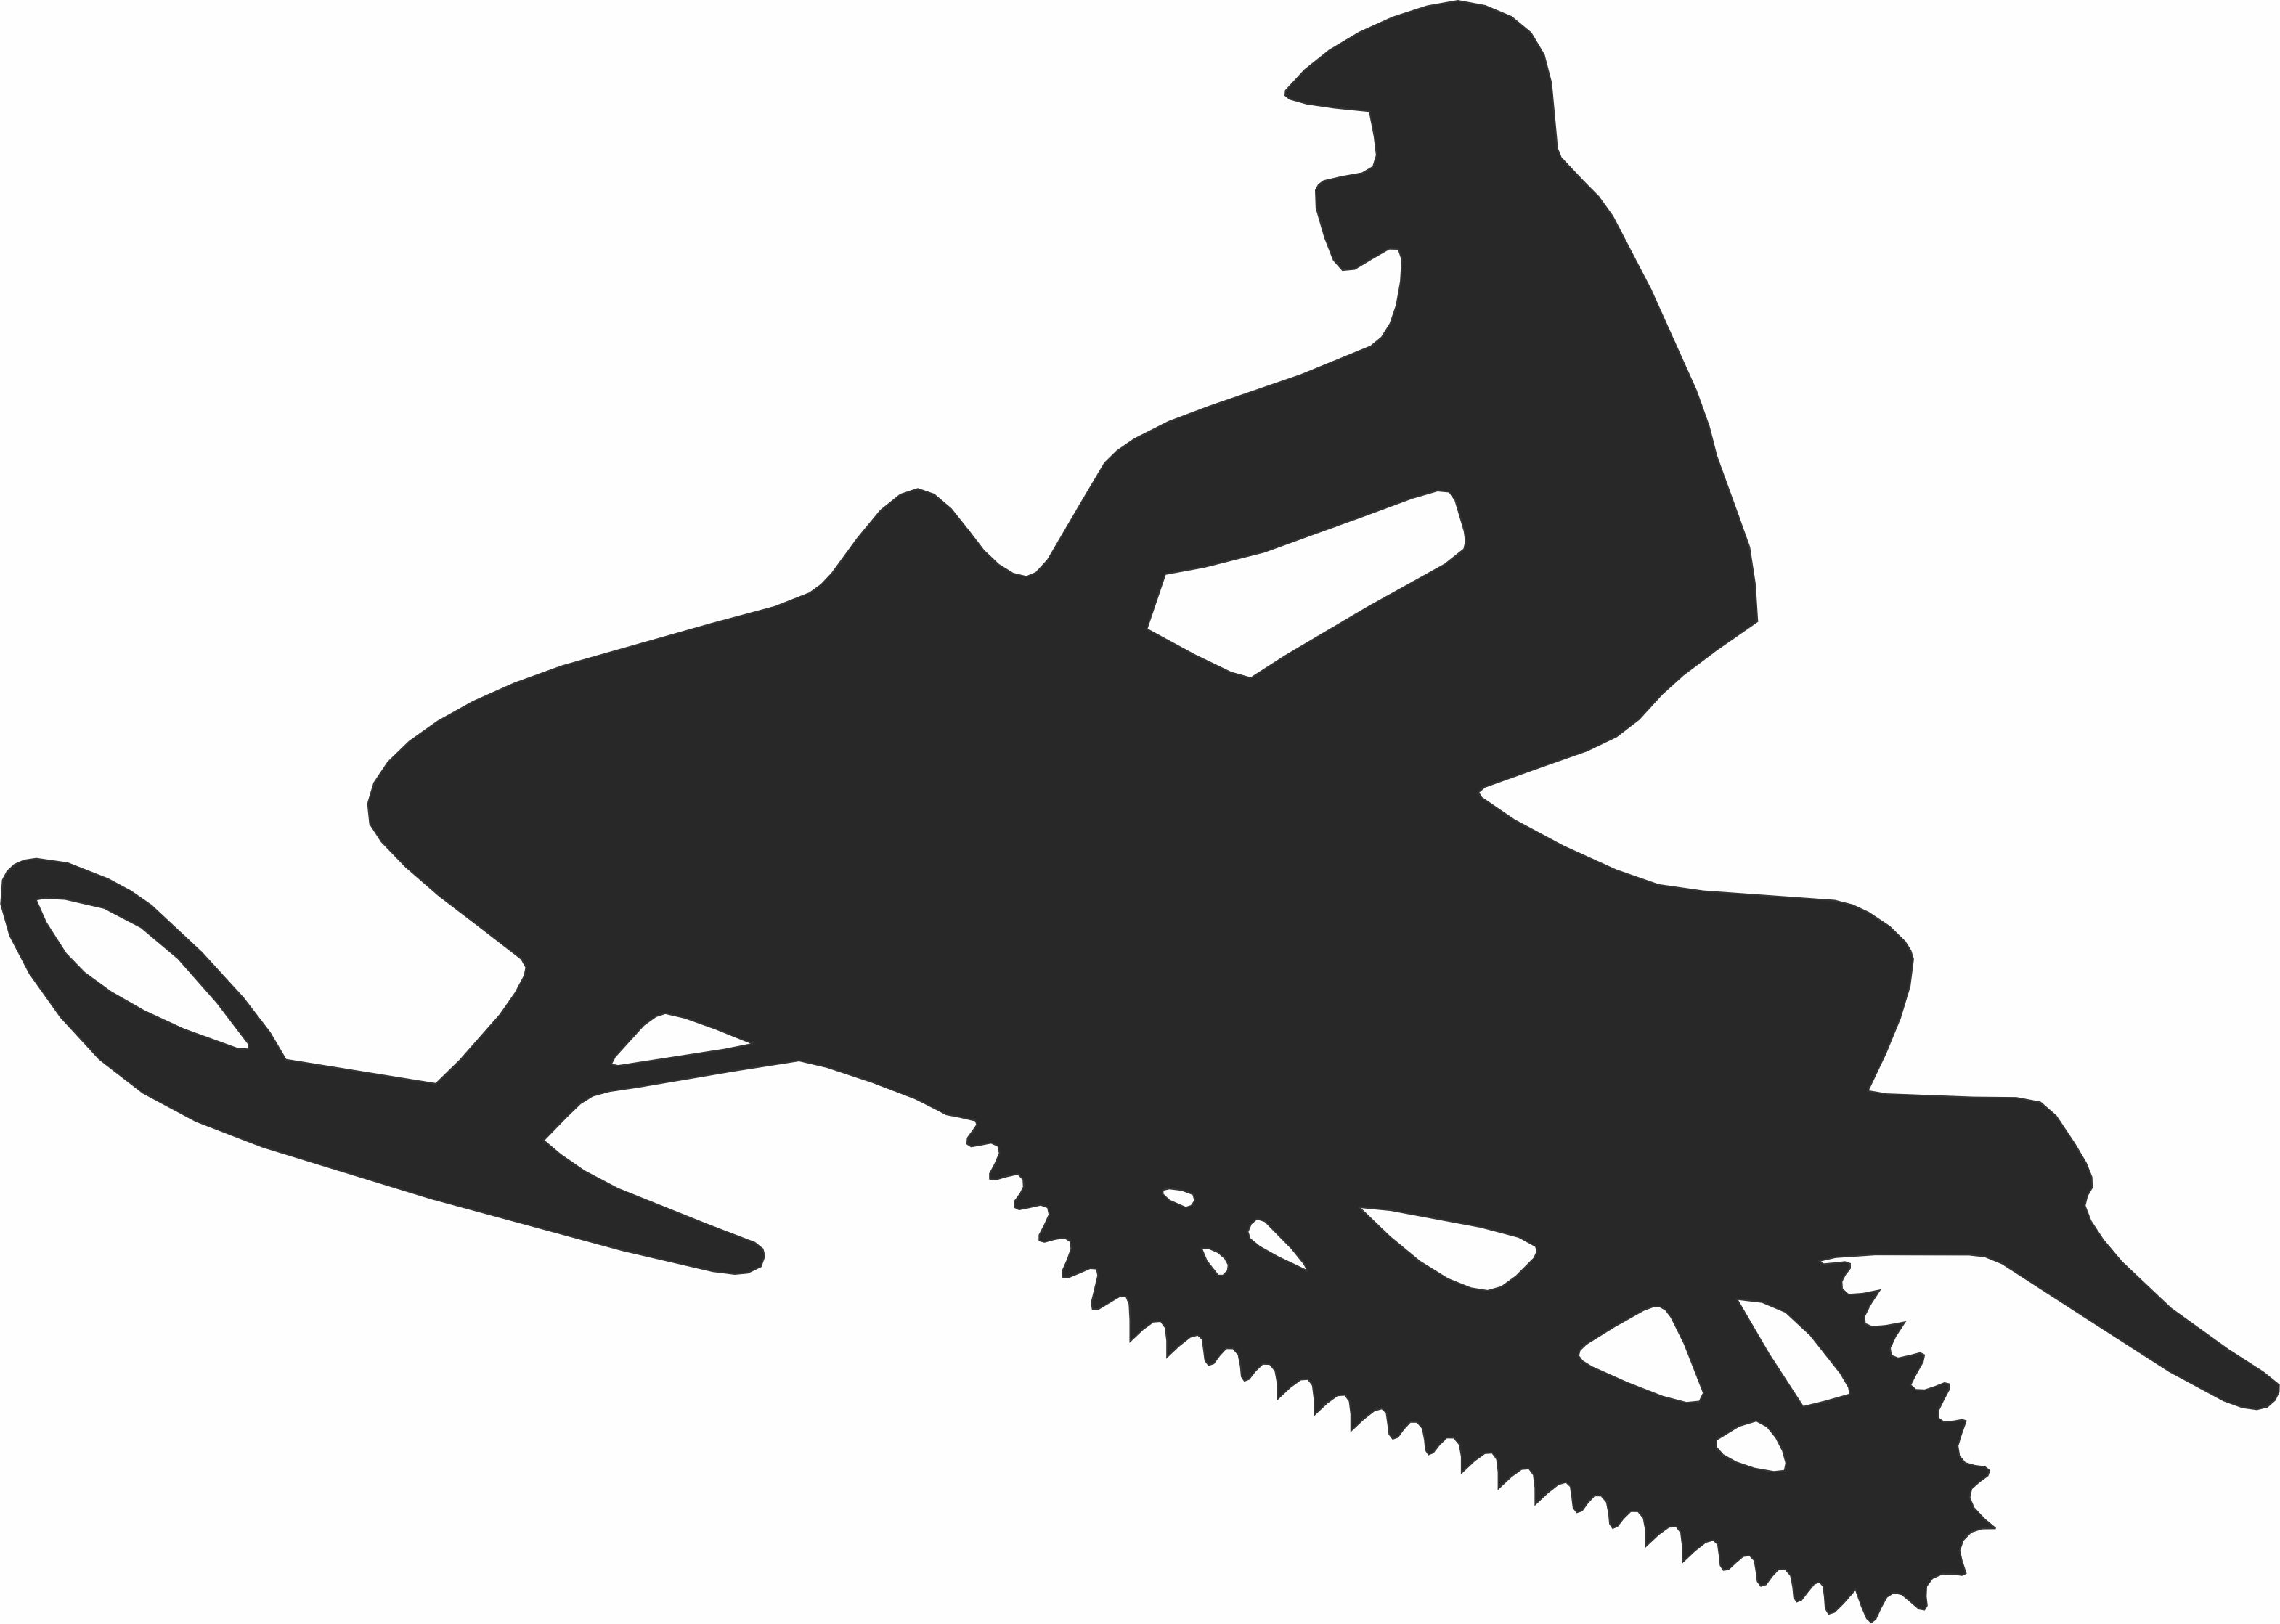 Snowmobile Silhouette - For Laser Cut DXF CDR SVG Files - free download.